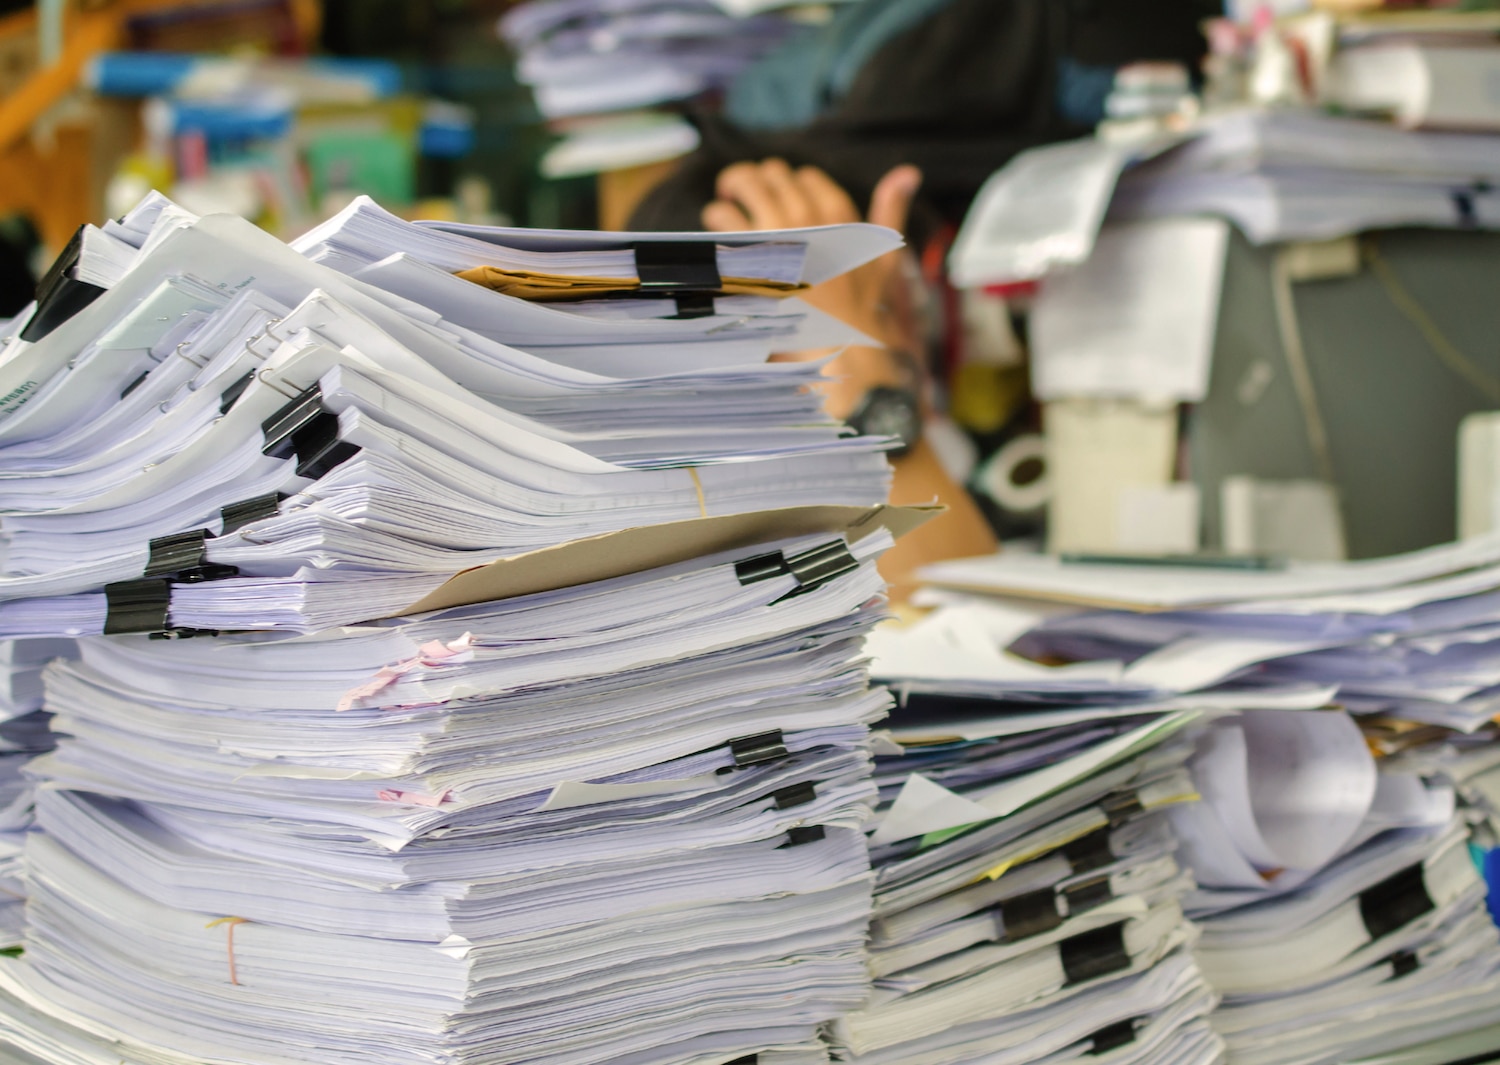 5 Benefits of Huntingdon business storage. Pile of documents on desk stack up high waiting to be managed.